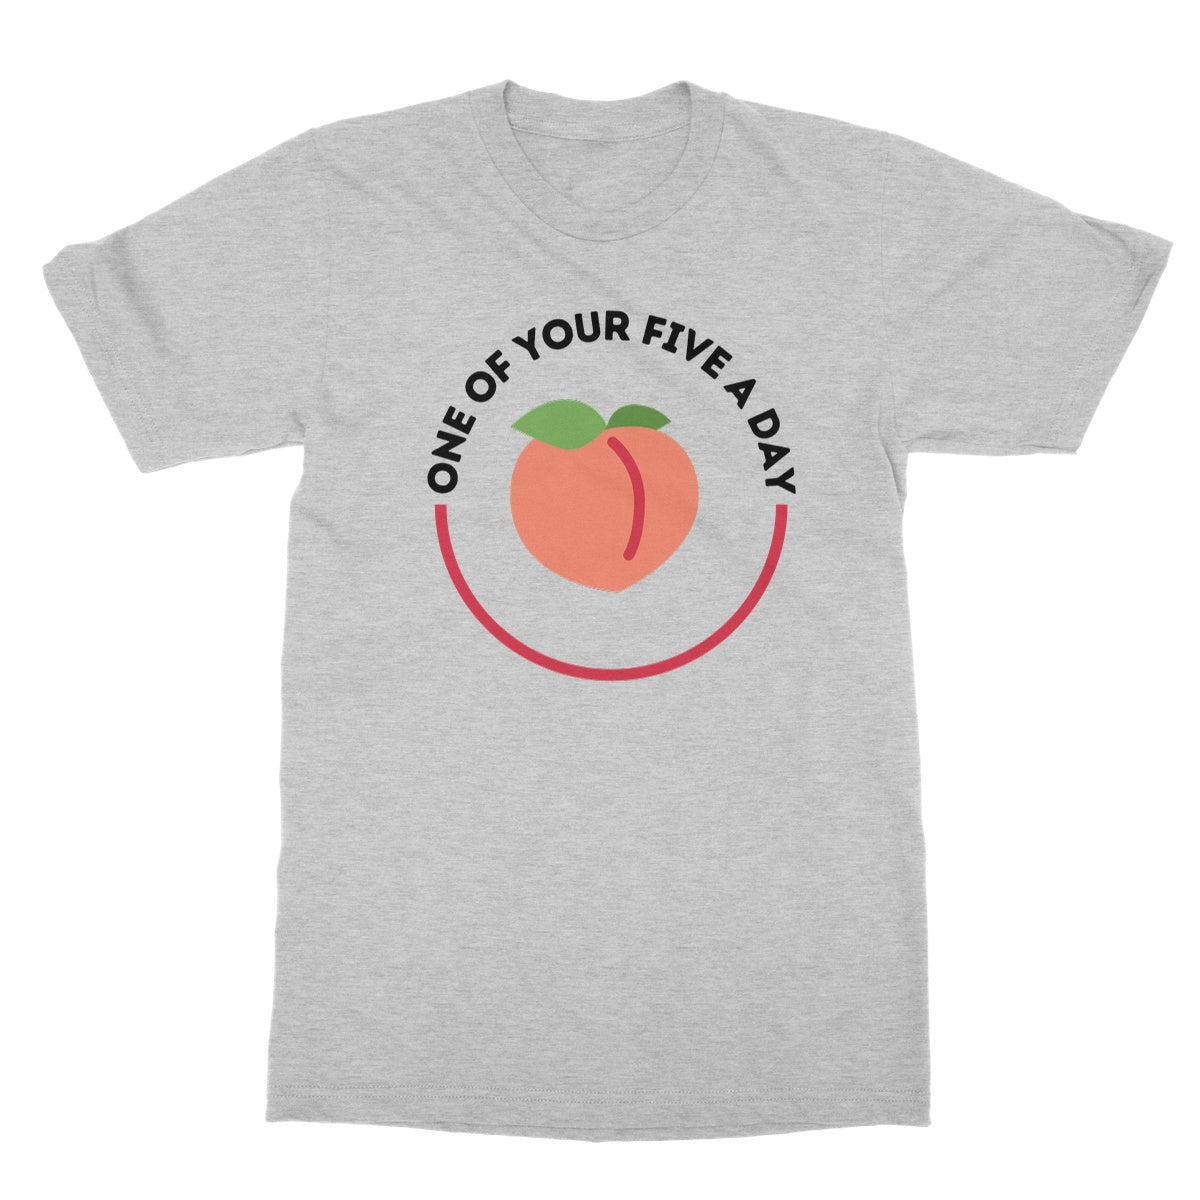 one of your five a day t shirt grey